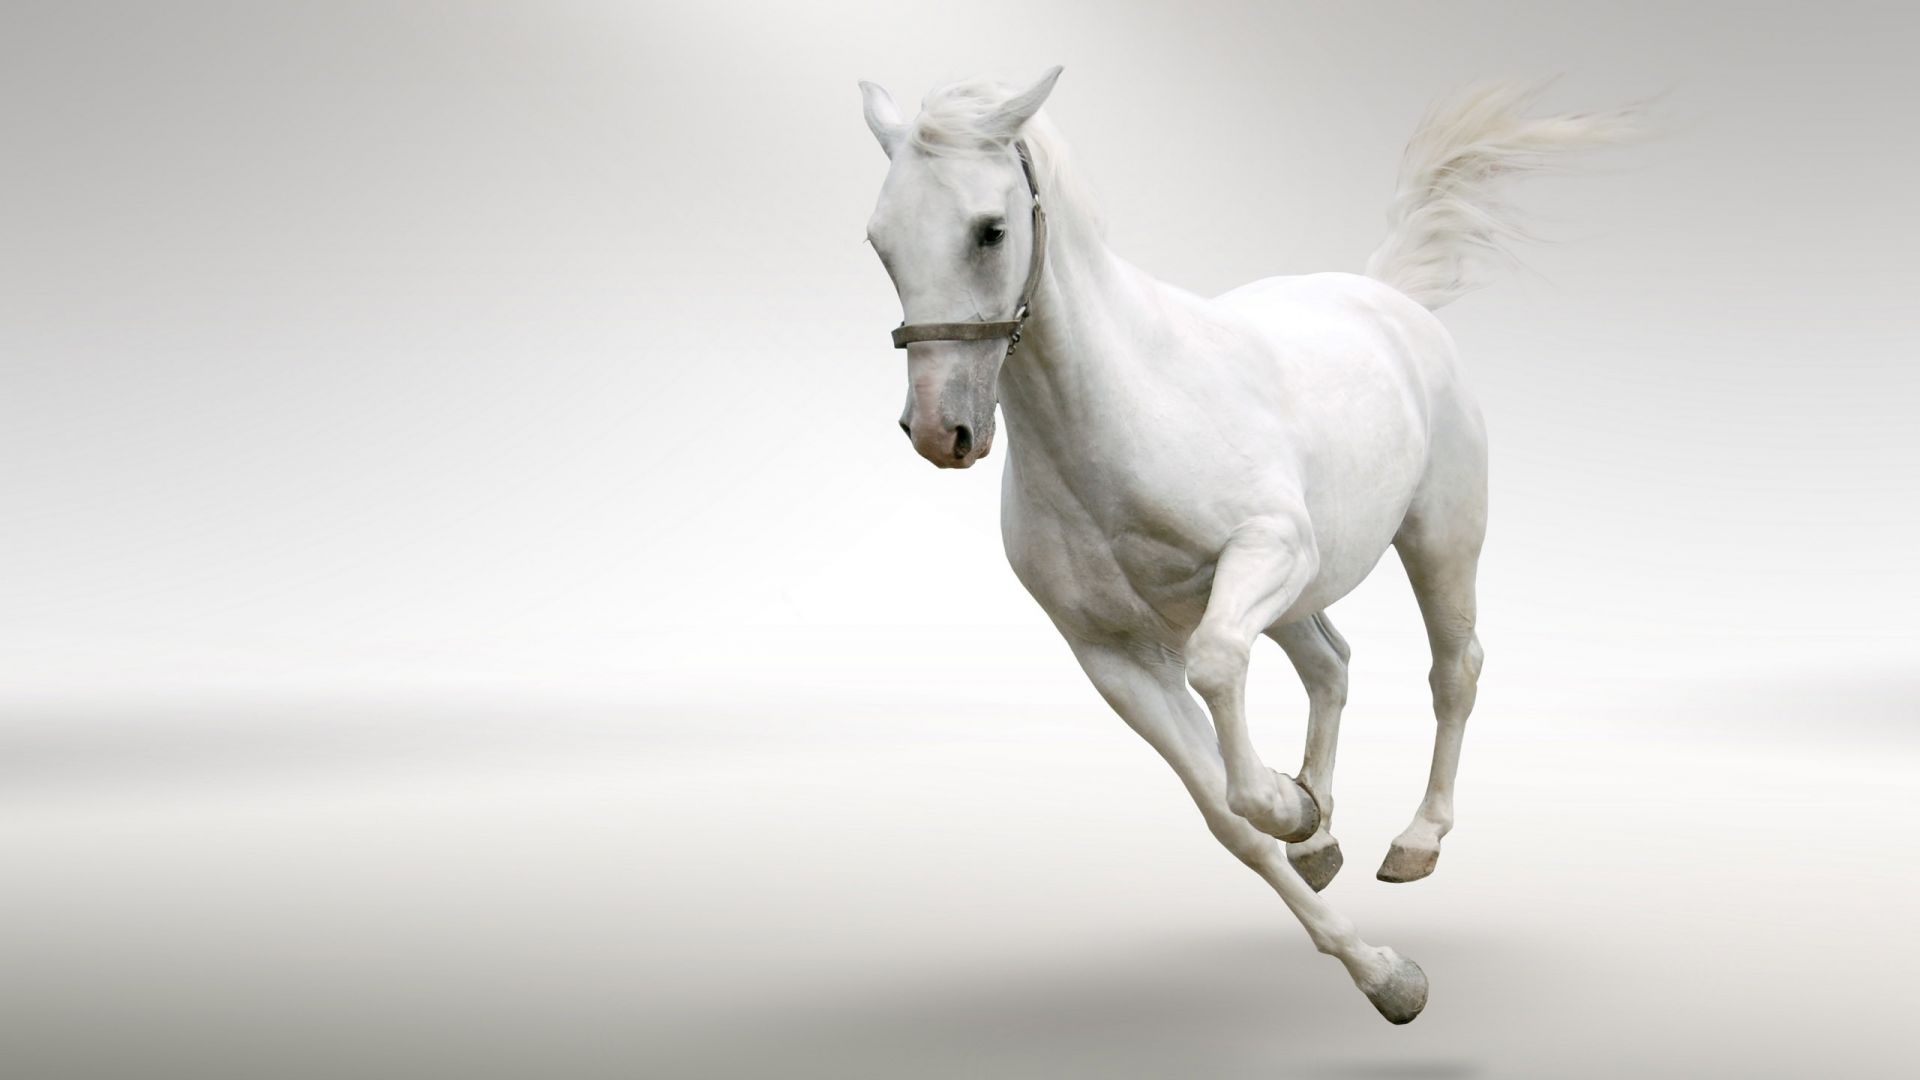 White Horse Running Images Hd - HD Wallpaper 